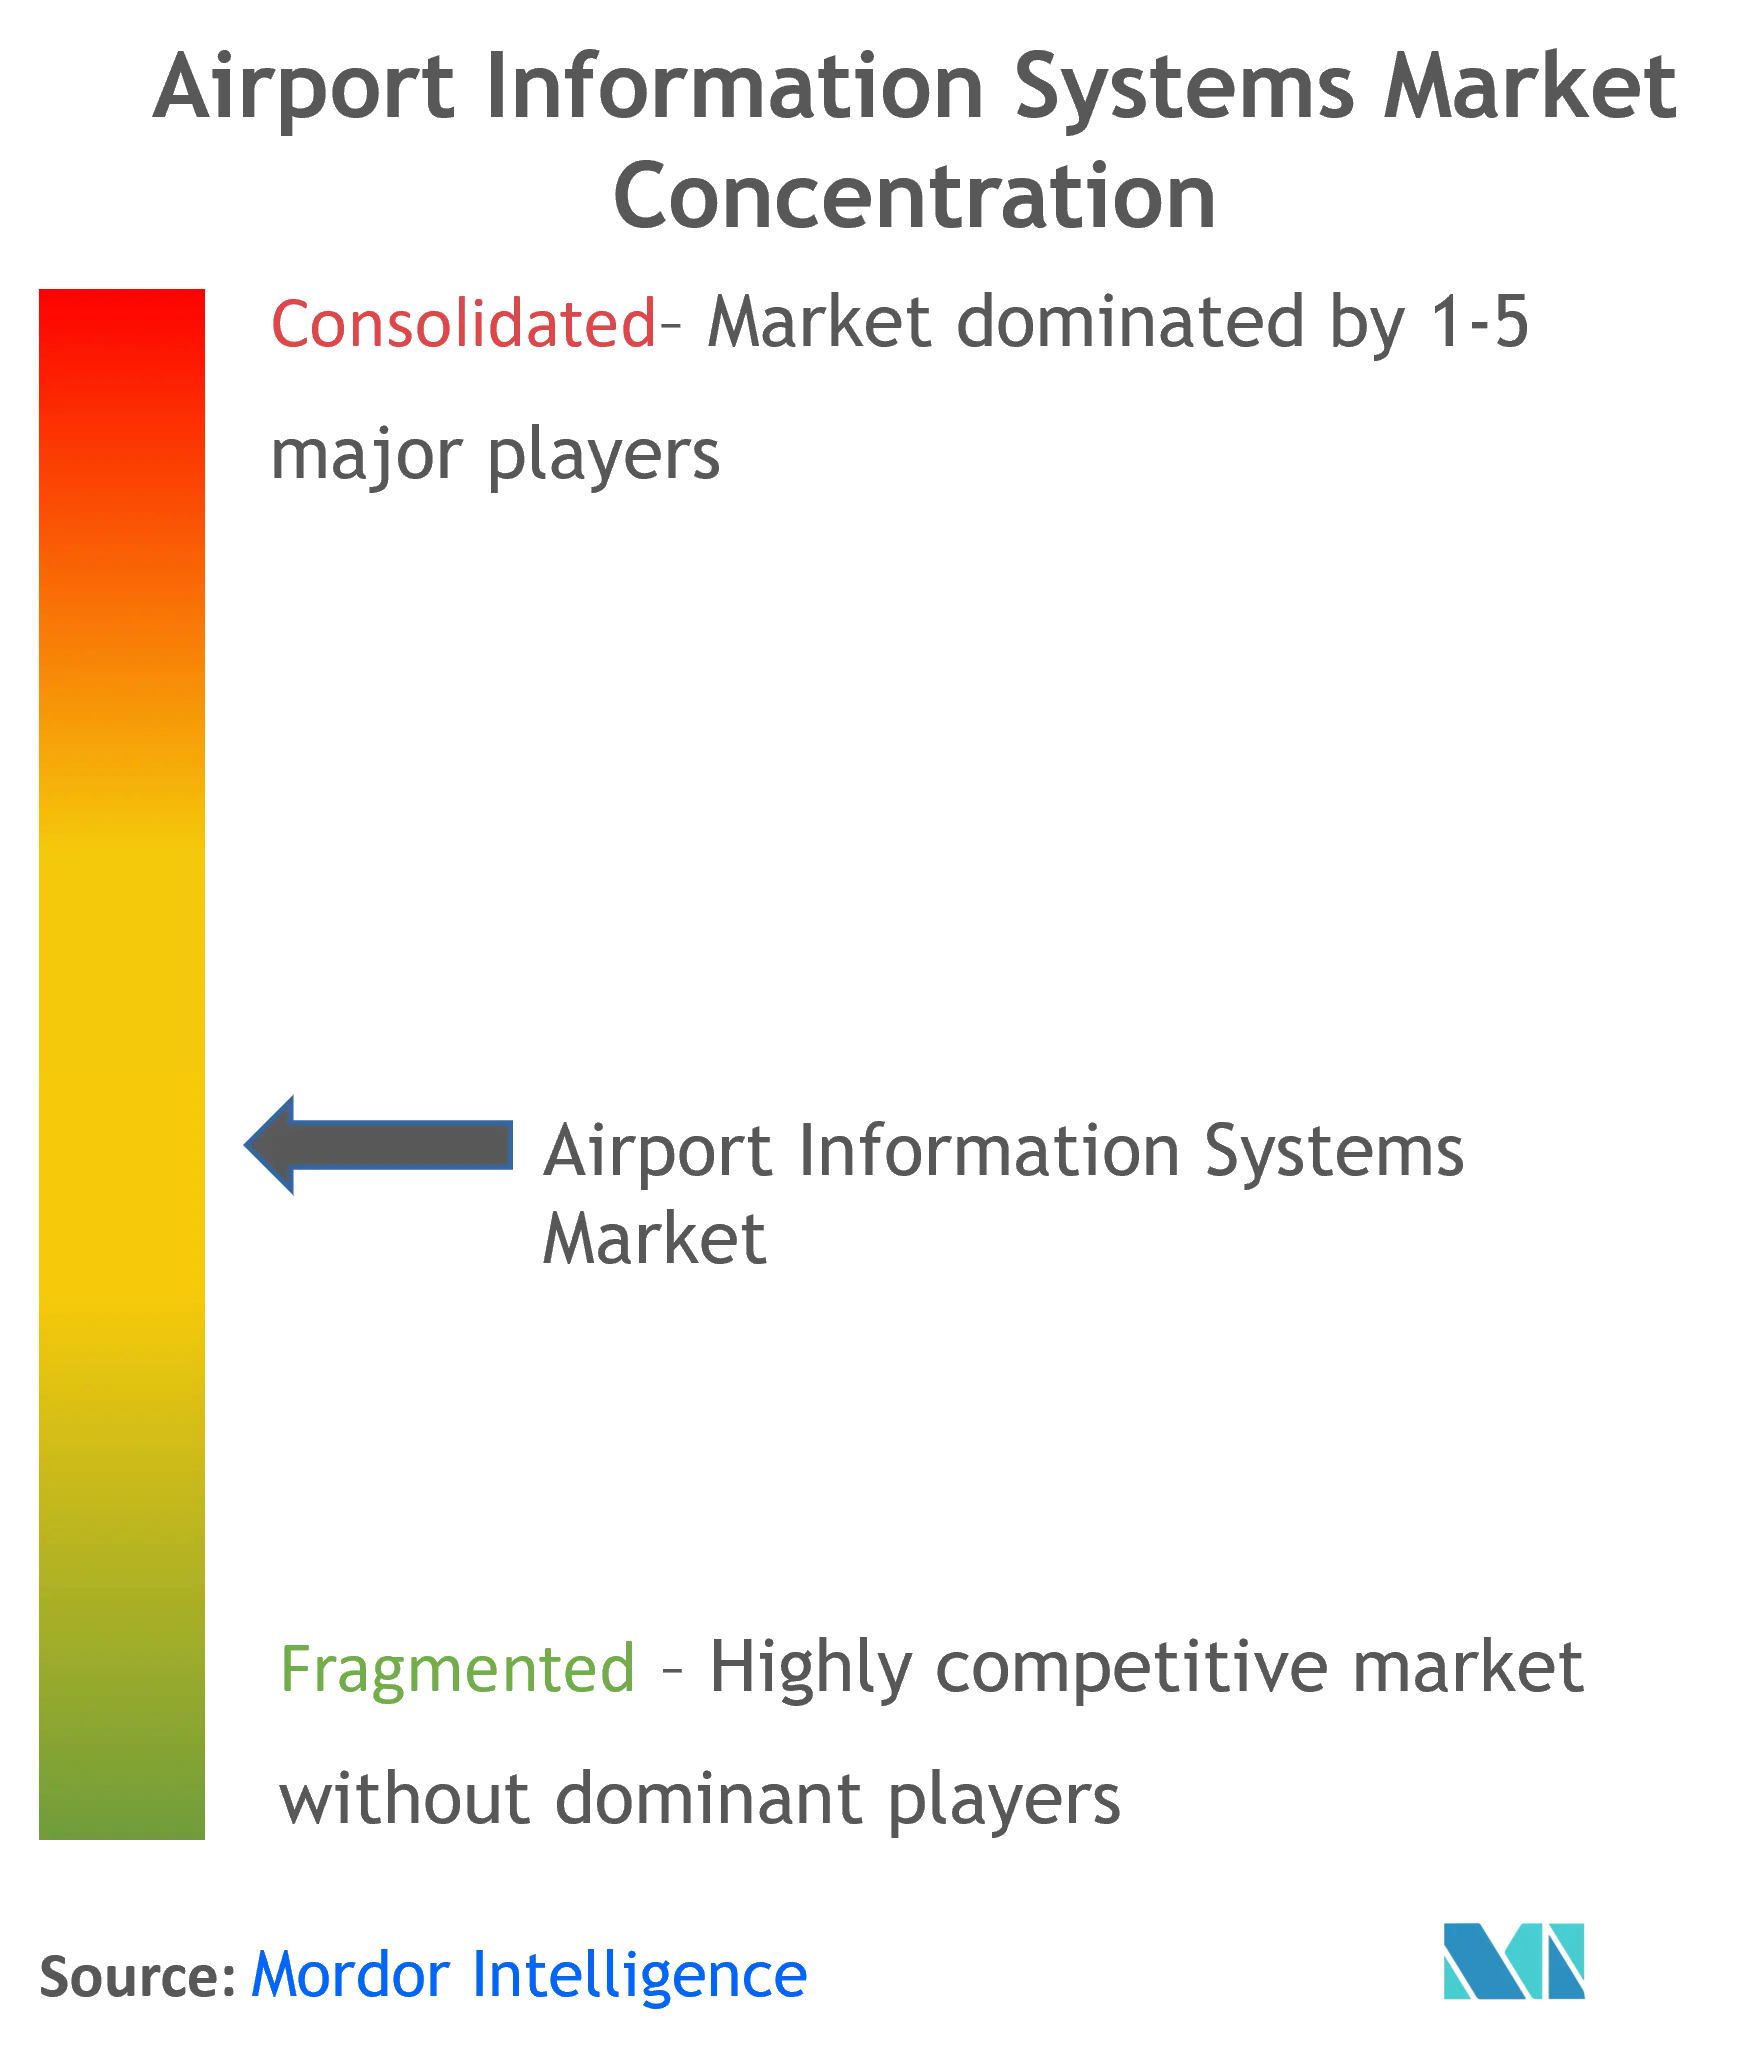 Airport Information Systems Market Concentration